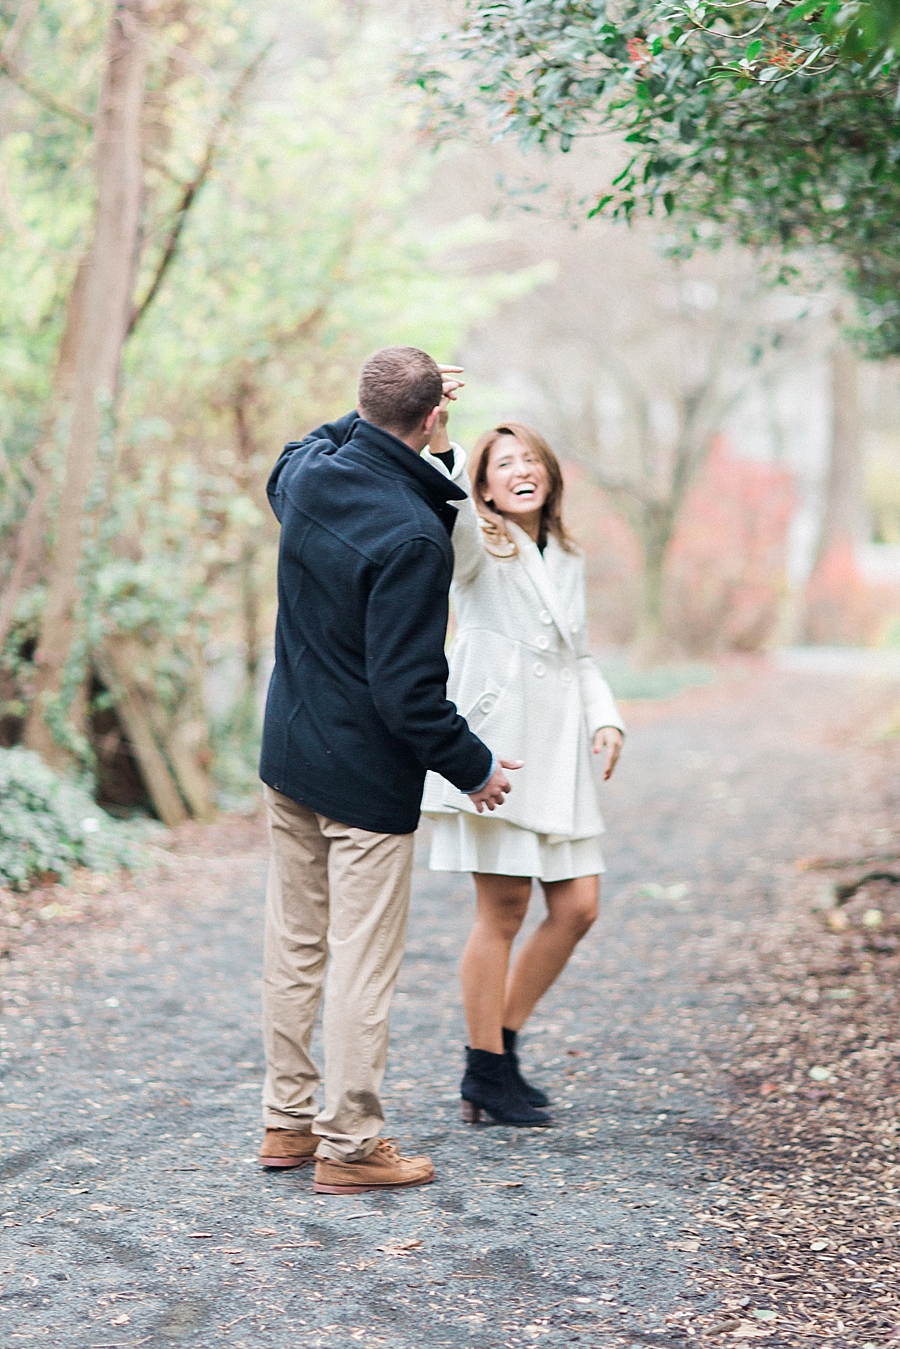 Falls Church engagement session | Abby Grace Photography